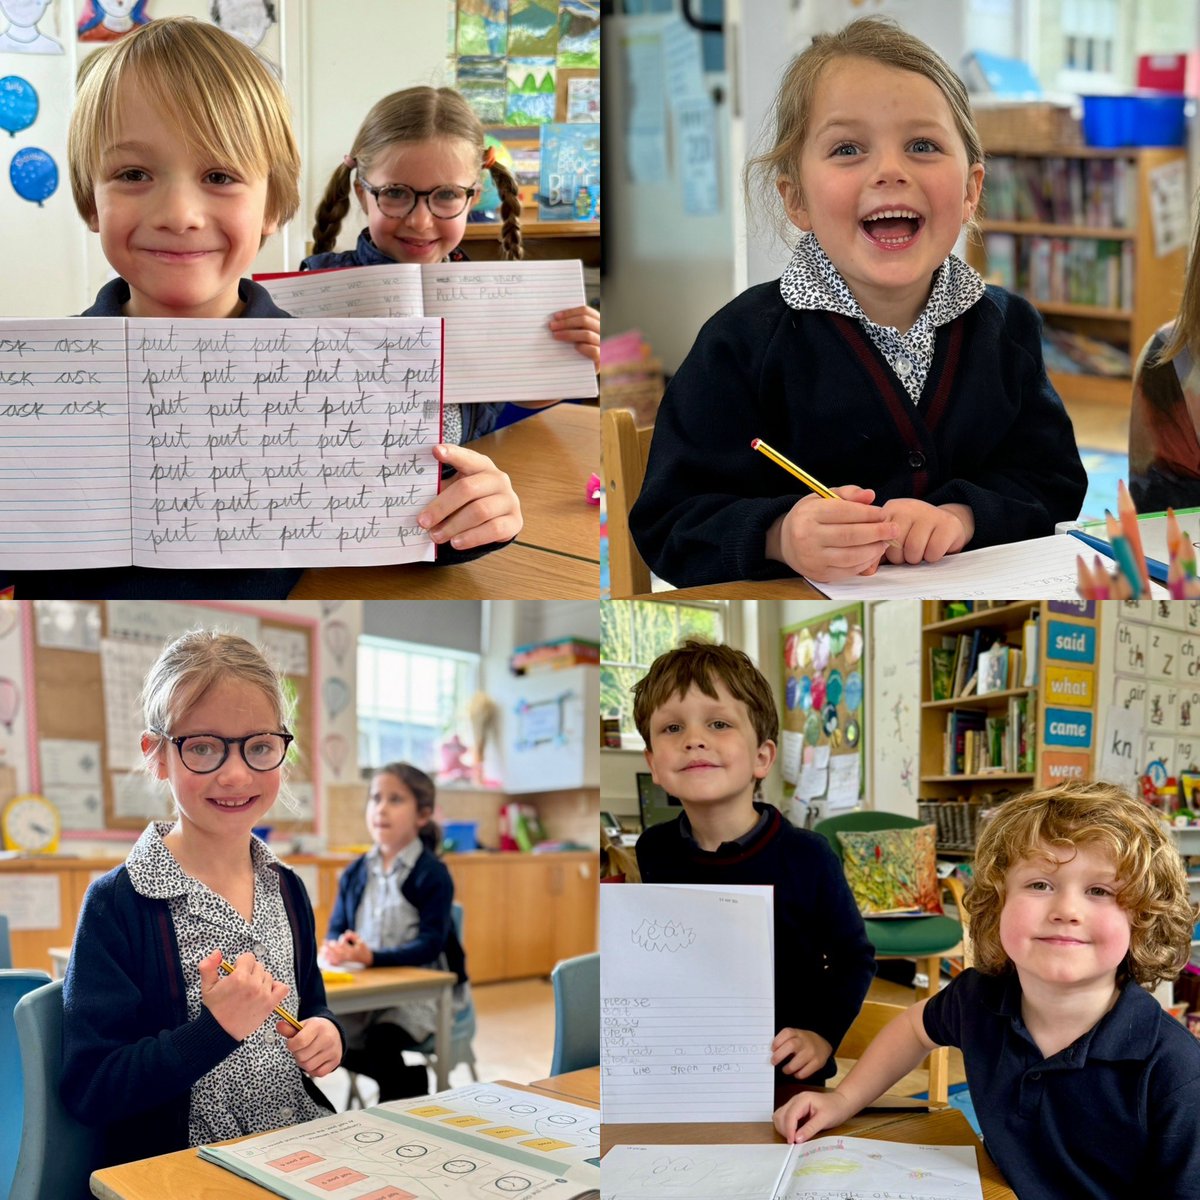 We are exceptionally proud of our wonderful Pre-Prep teachers, who work hard to nurture and inspire the children every day. To read more about the teaching in Pre-Prep, head to our Facebook or Instagram pages! #portregis #preprep #dorset